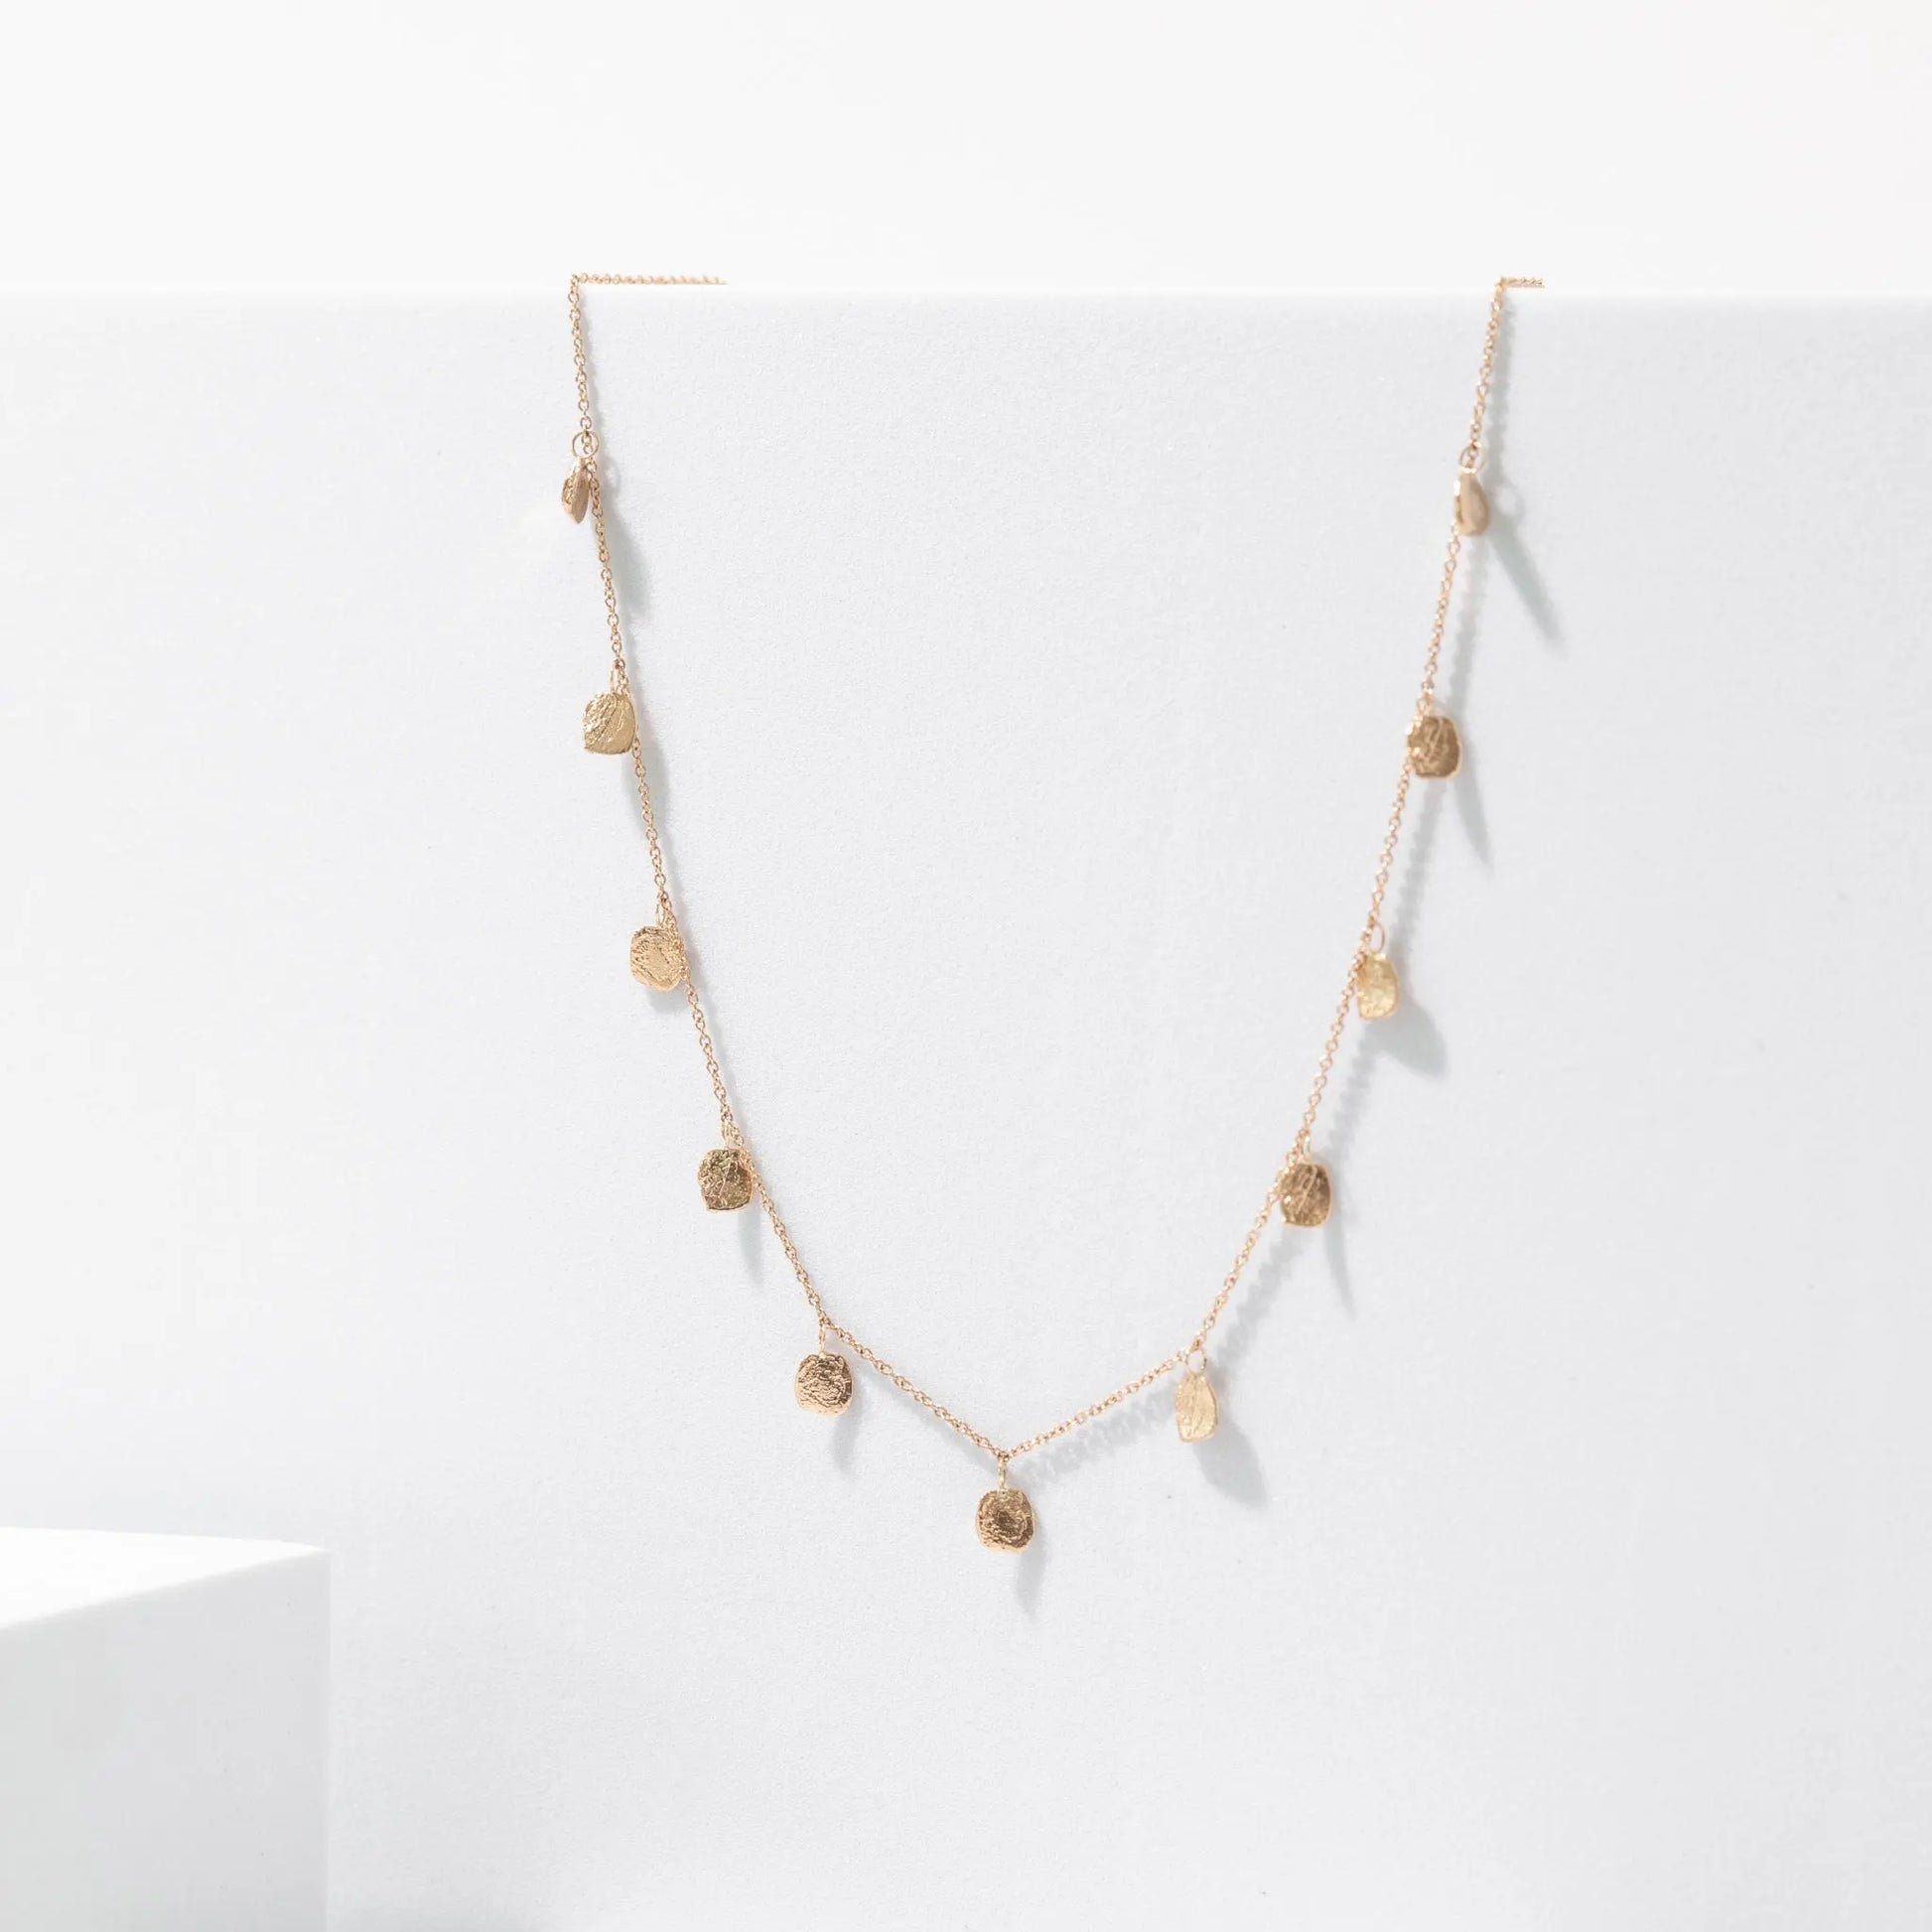 Birch Drip Necklace Mary Frances Maker